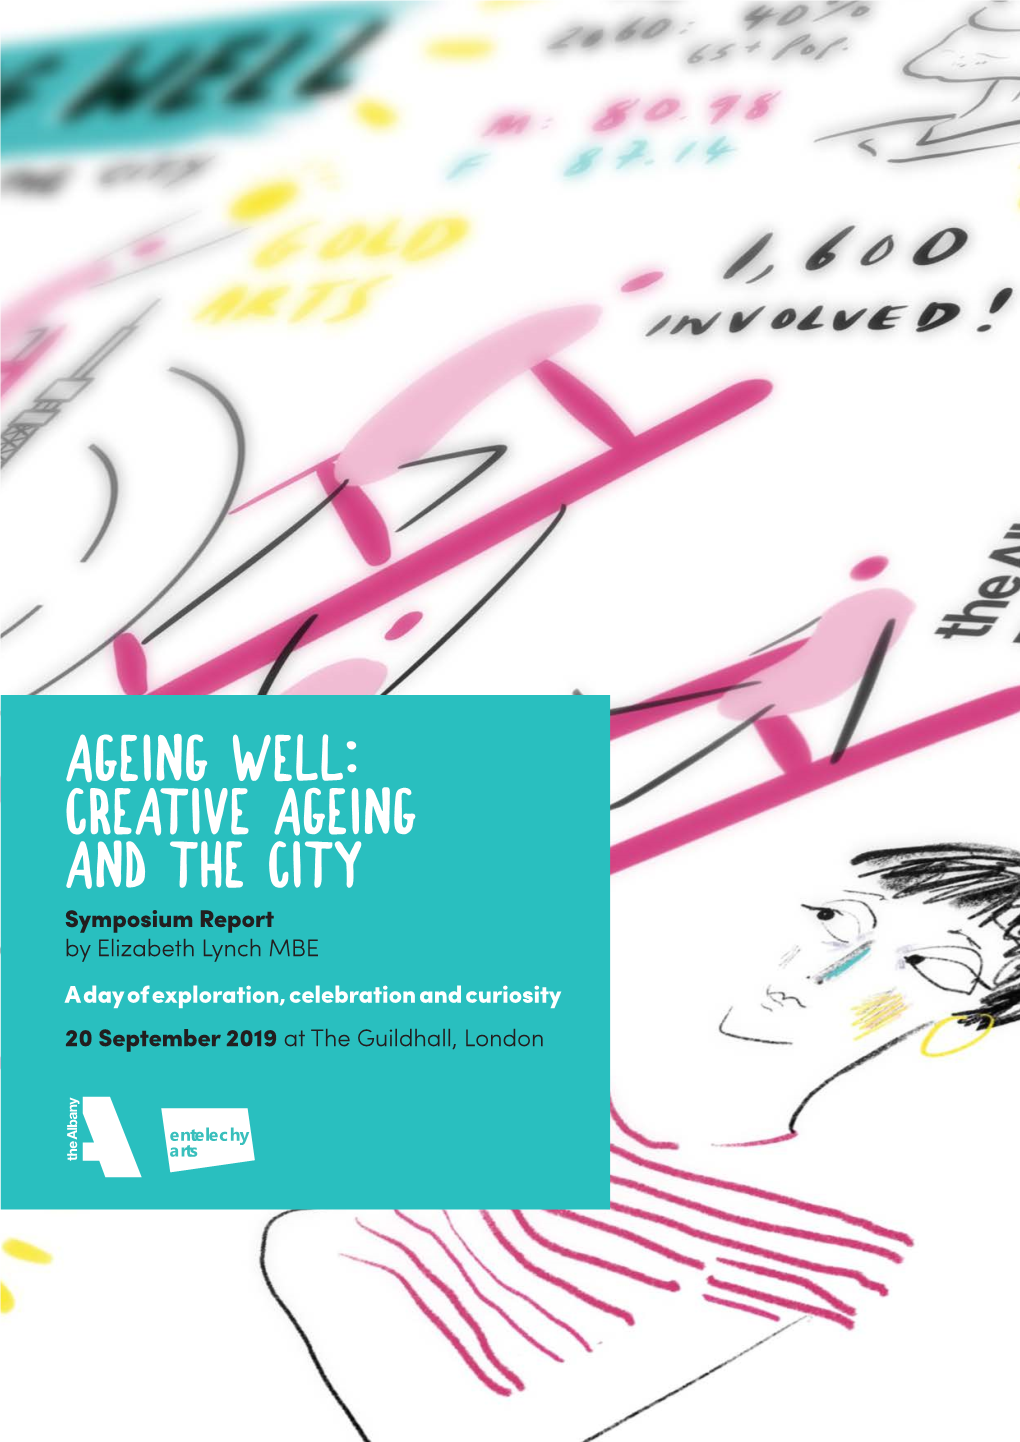 'Ageing Well: Creative Ageing and the City' Symposium